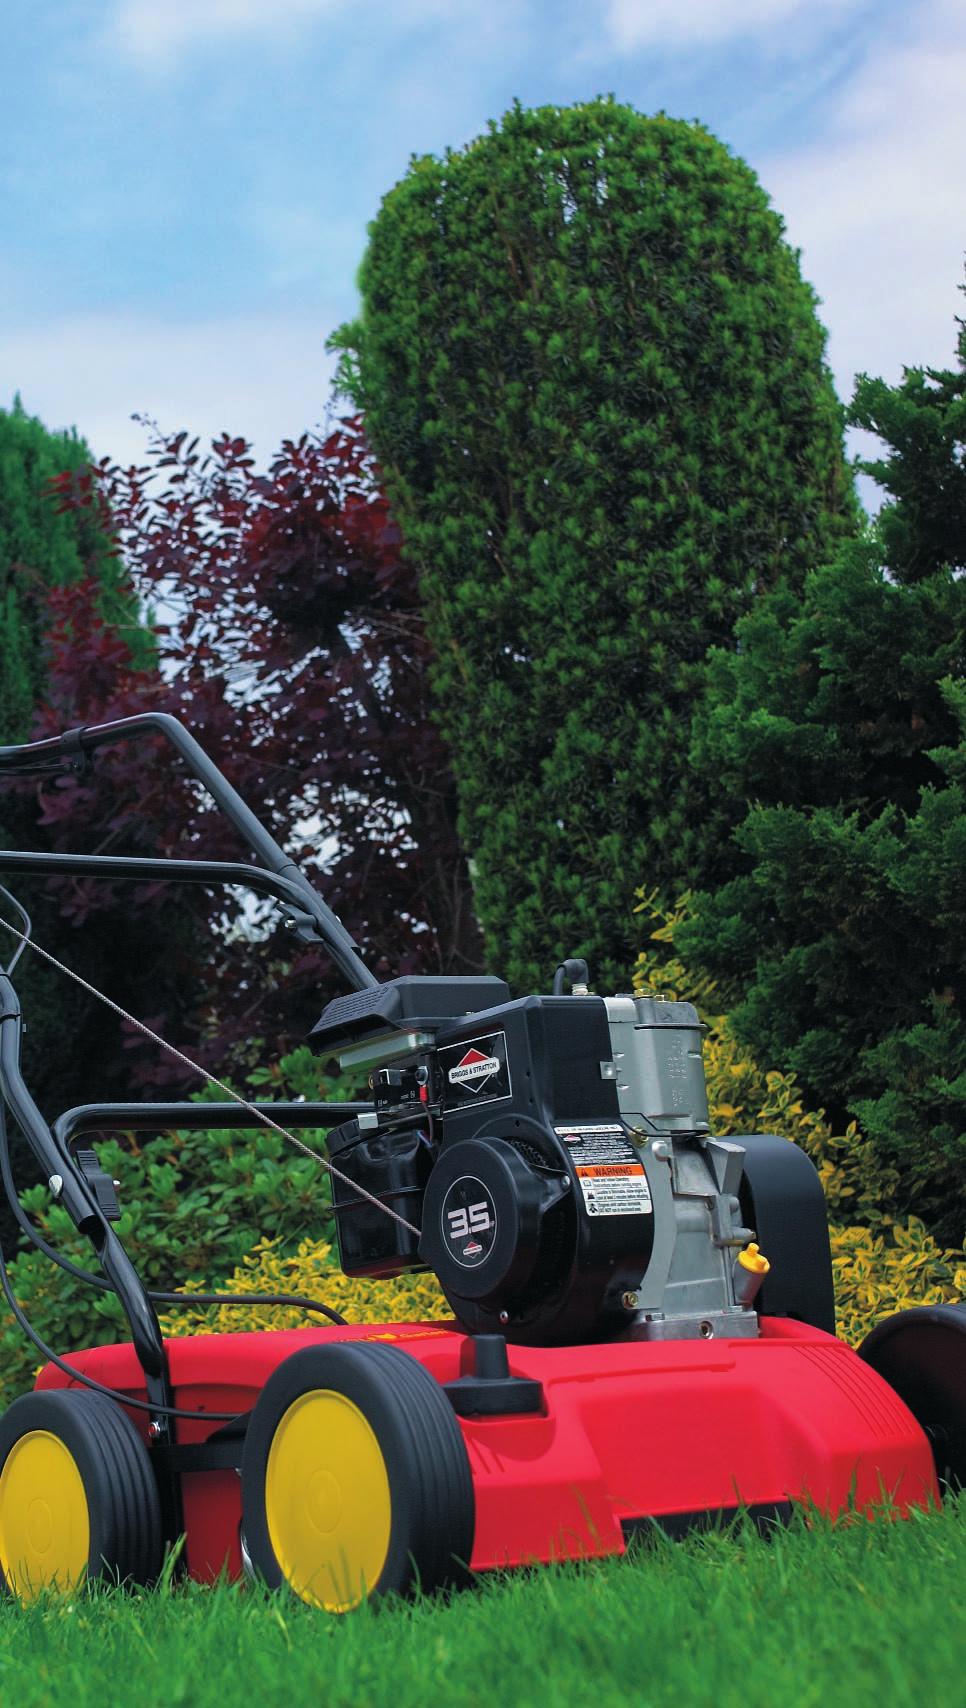 Lawn Care Scarifiers Spreaders and Hose Trolleys Grass